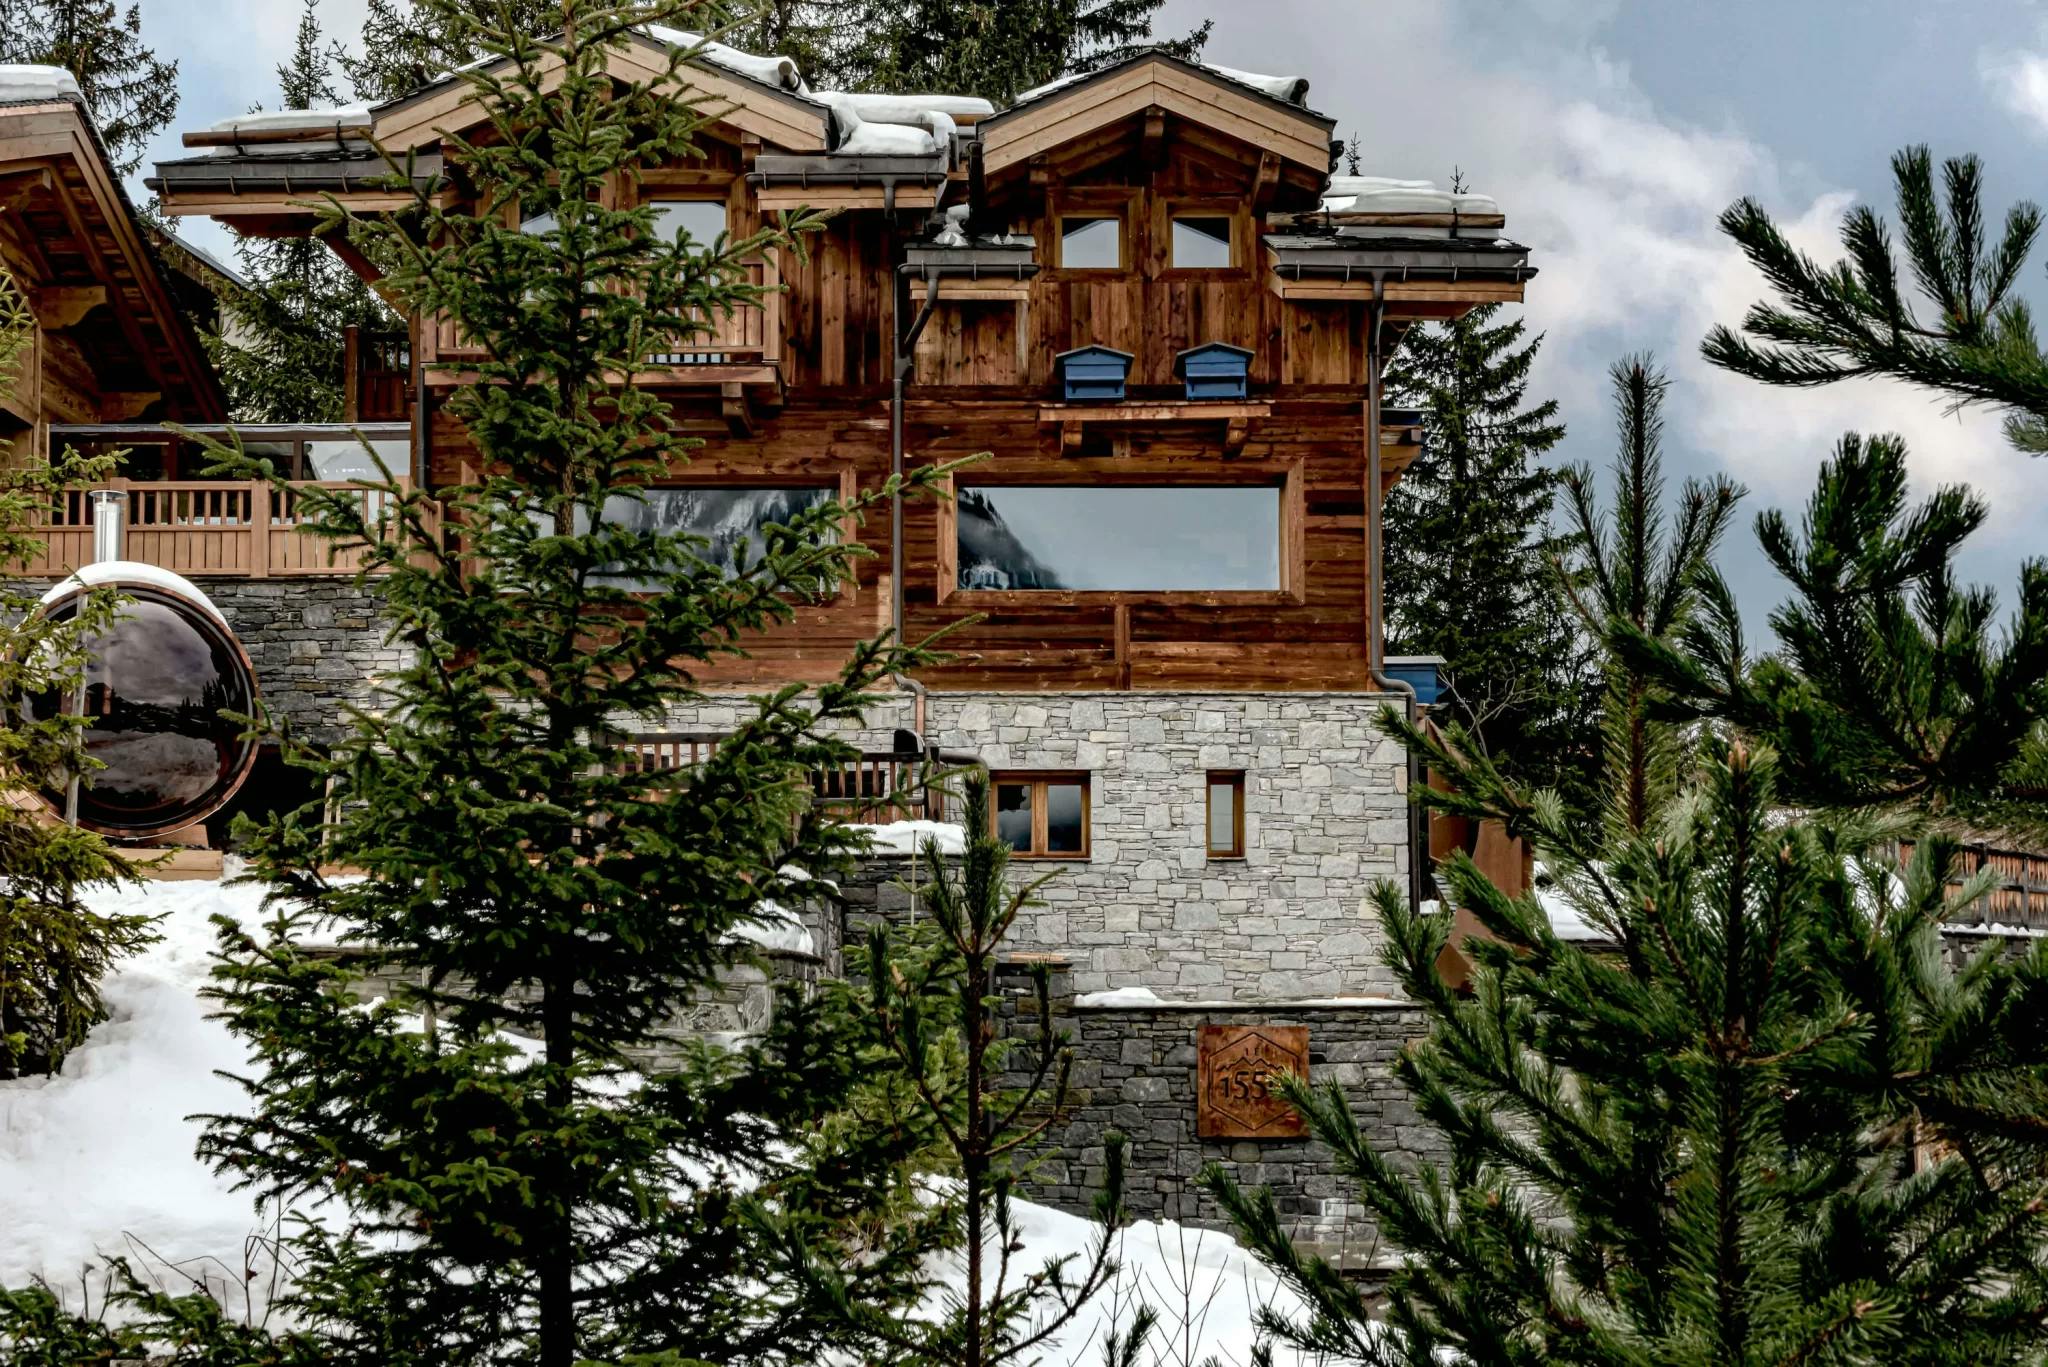 The 1550 chalet, view from the outside among fir trees